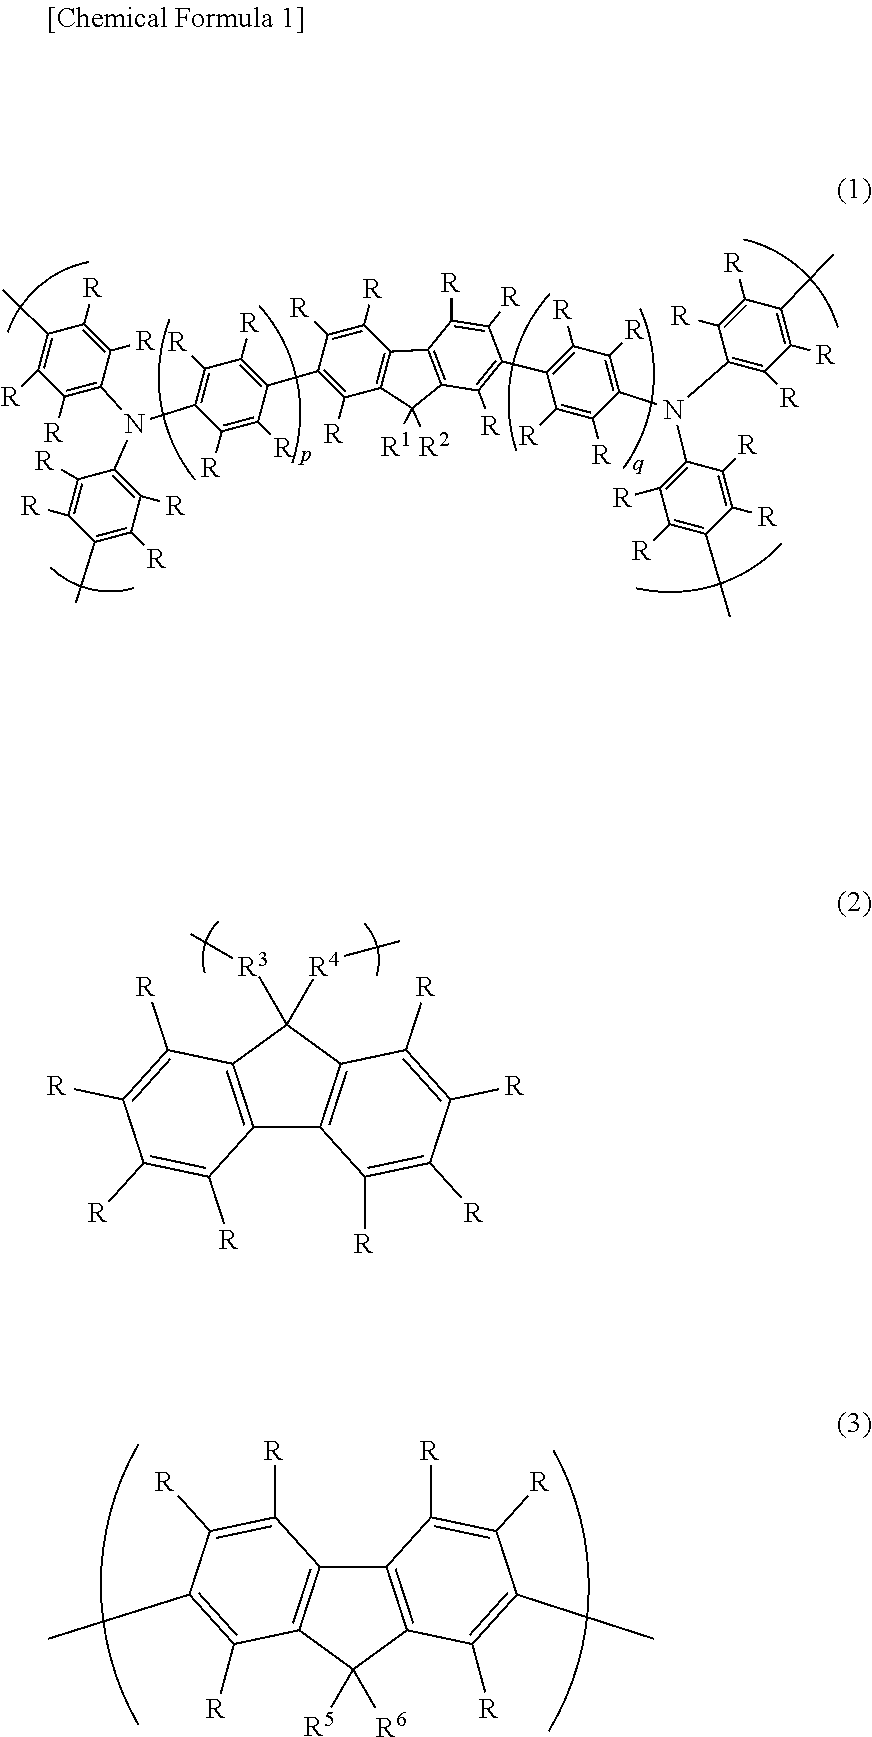 Fluorine atom-containing polymer and use of same